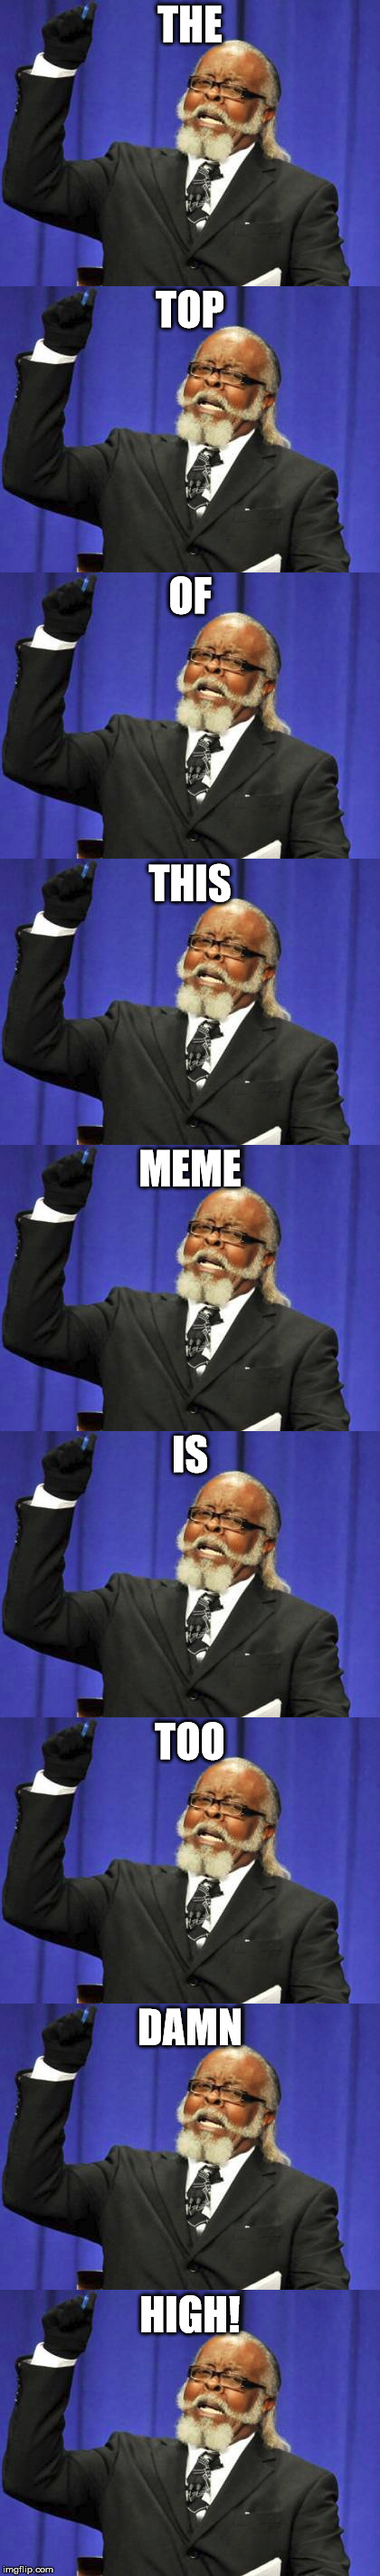 Now that is TOO DAMN HIGH! | THE; TOP; OF; THIS; MEME; IS; TOO; DAMN; HIGH! | image tagged in too damn high,meme,imgflip,funny,memes | made w/ Imgflip meme maker